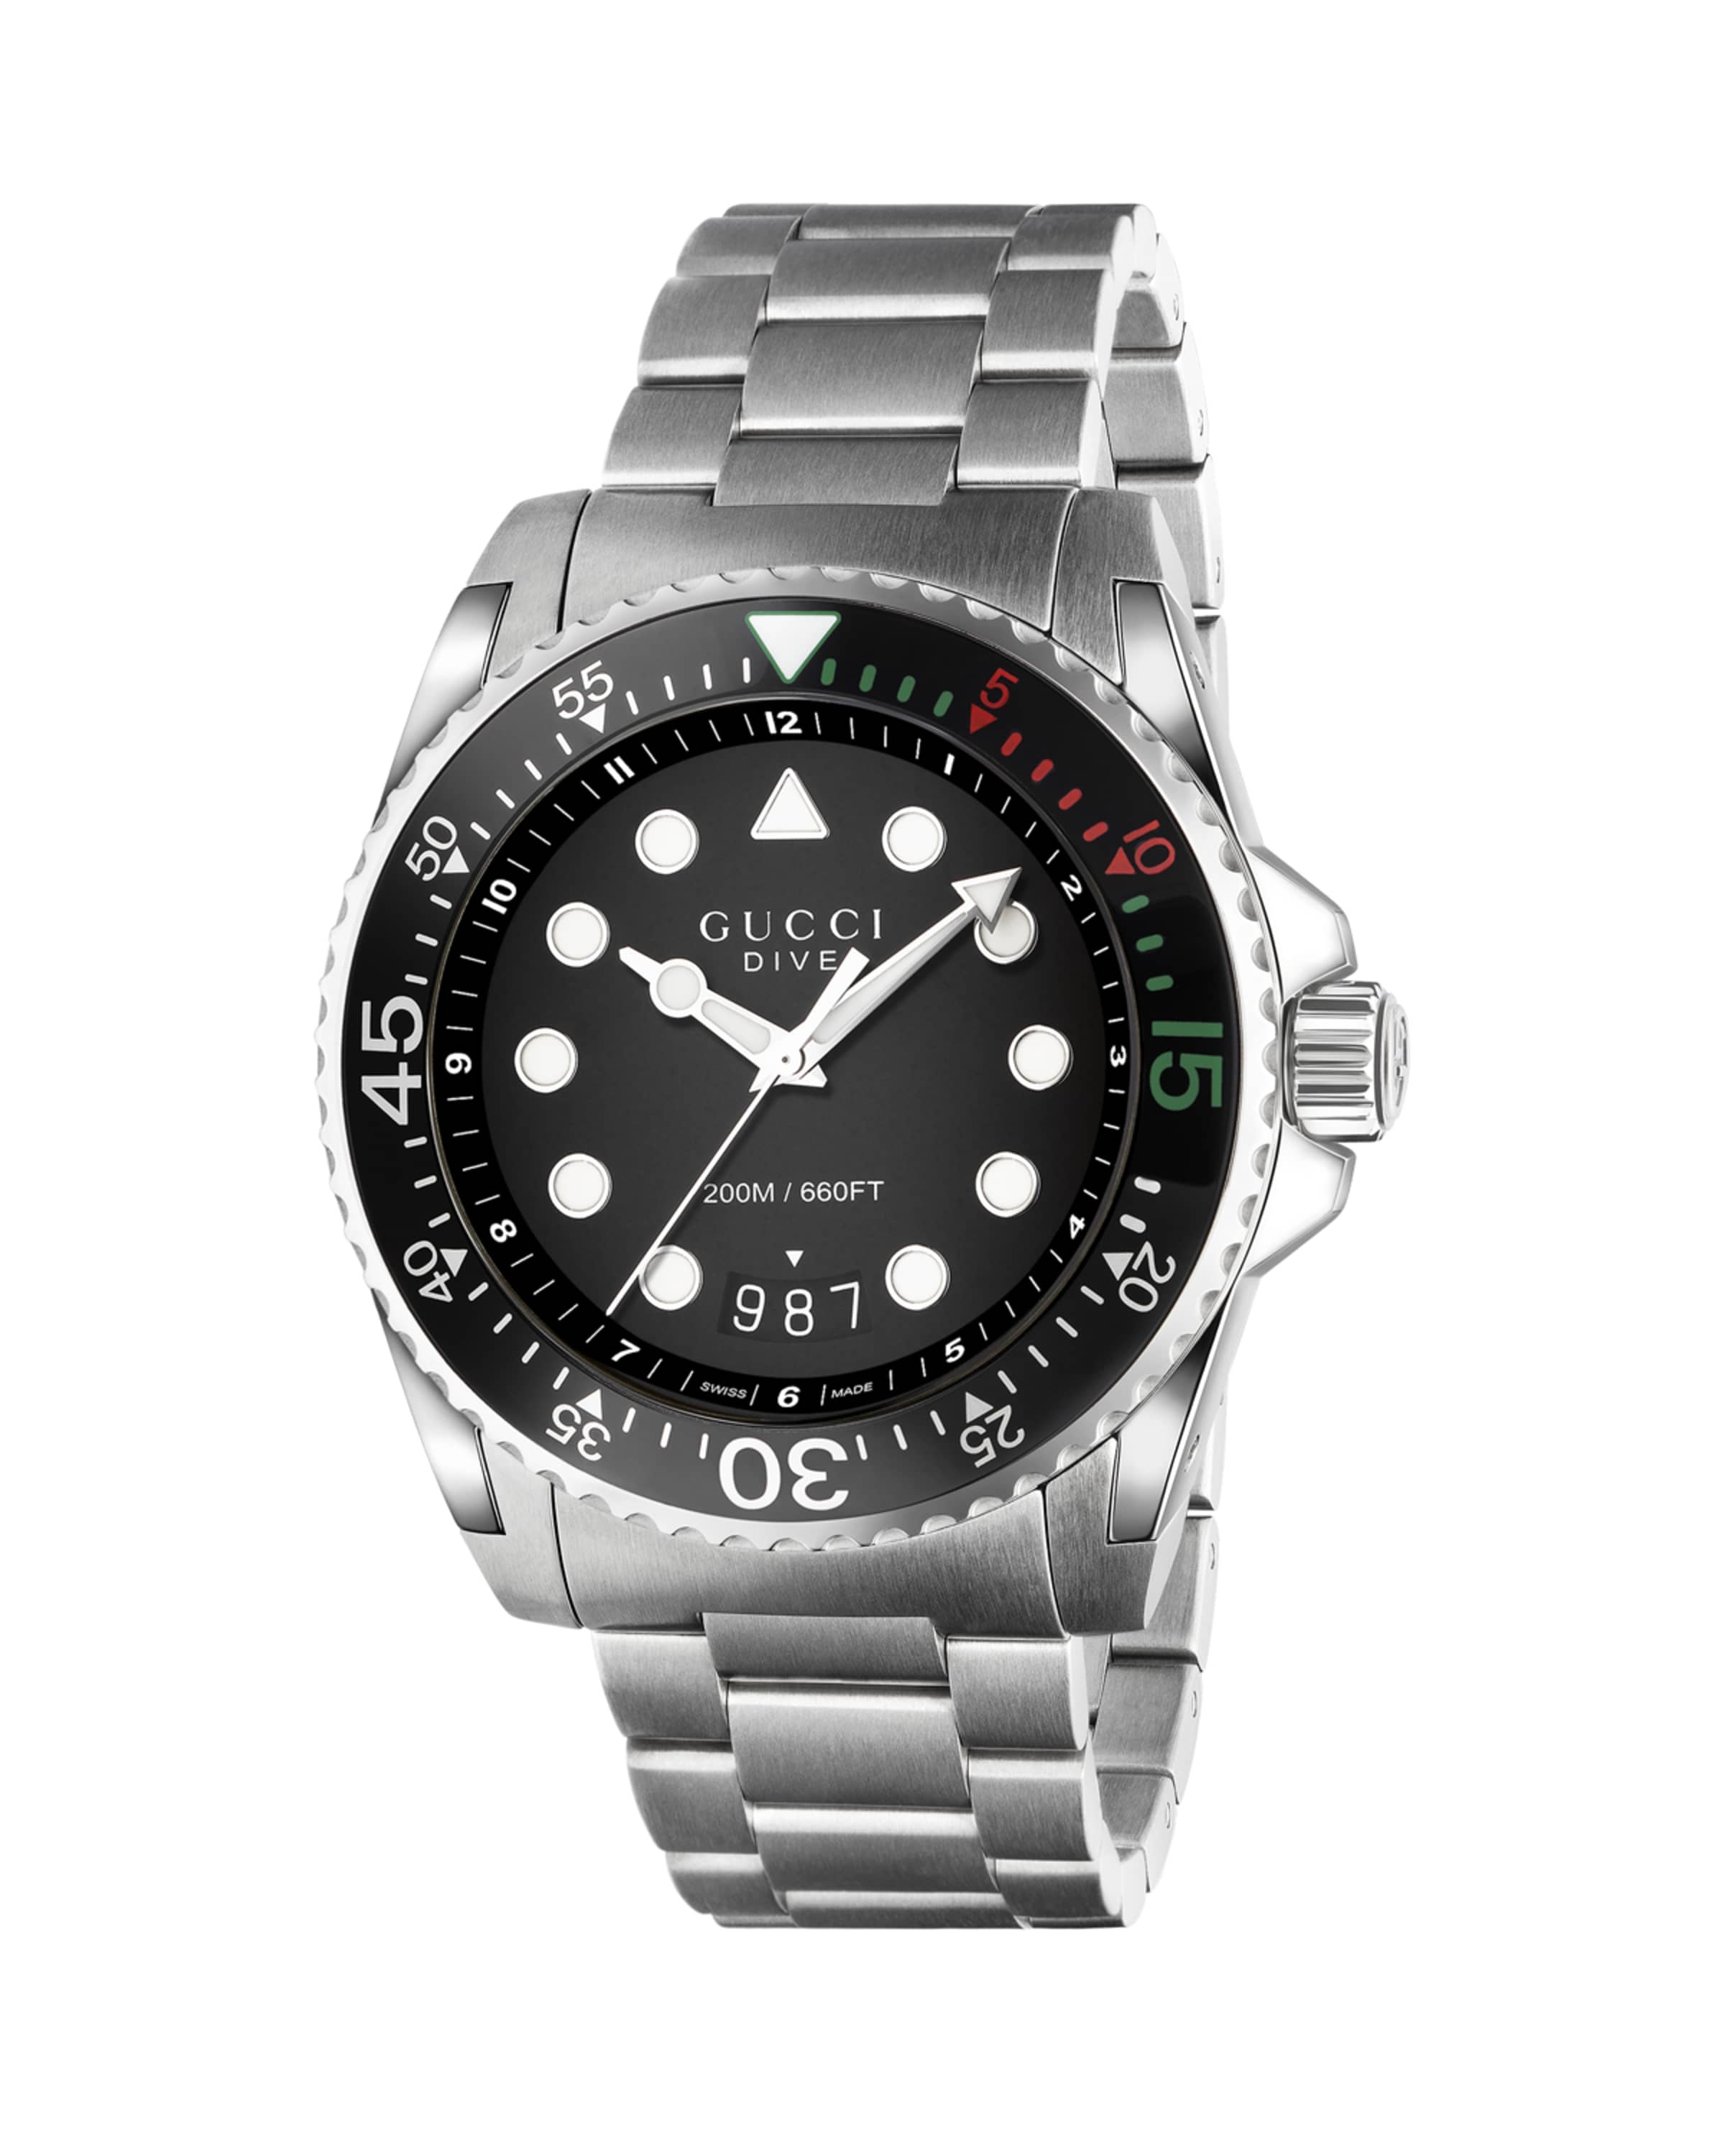 45mm Gucci Dive Stainless Steel Bracelet Watch - 1